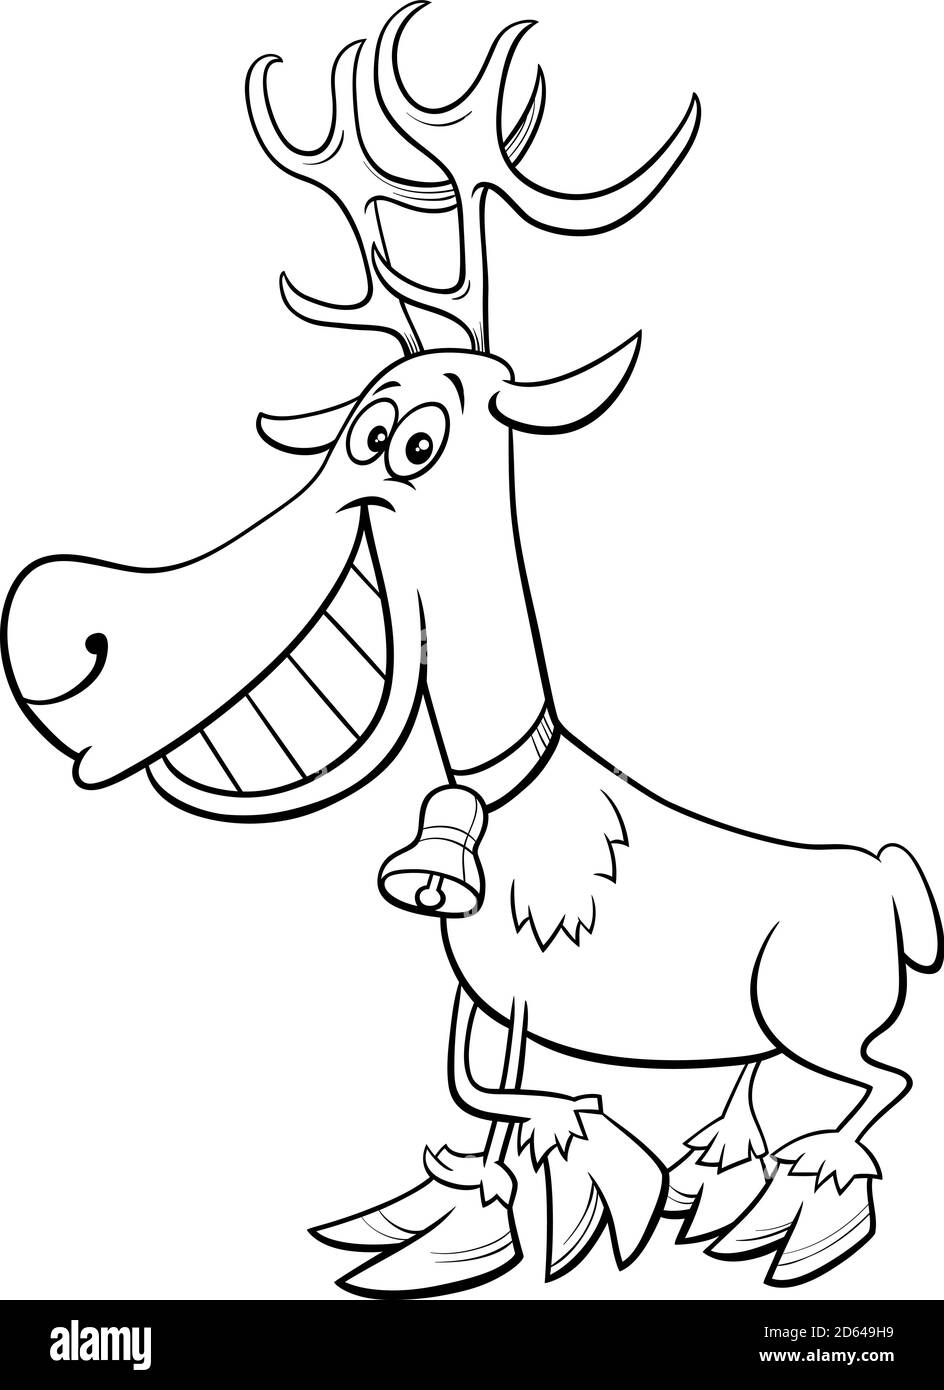 Black and White Cartoon Illustration of Christmas Reindeer Character Coloring Book Page Stock Vector